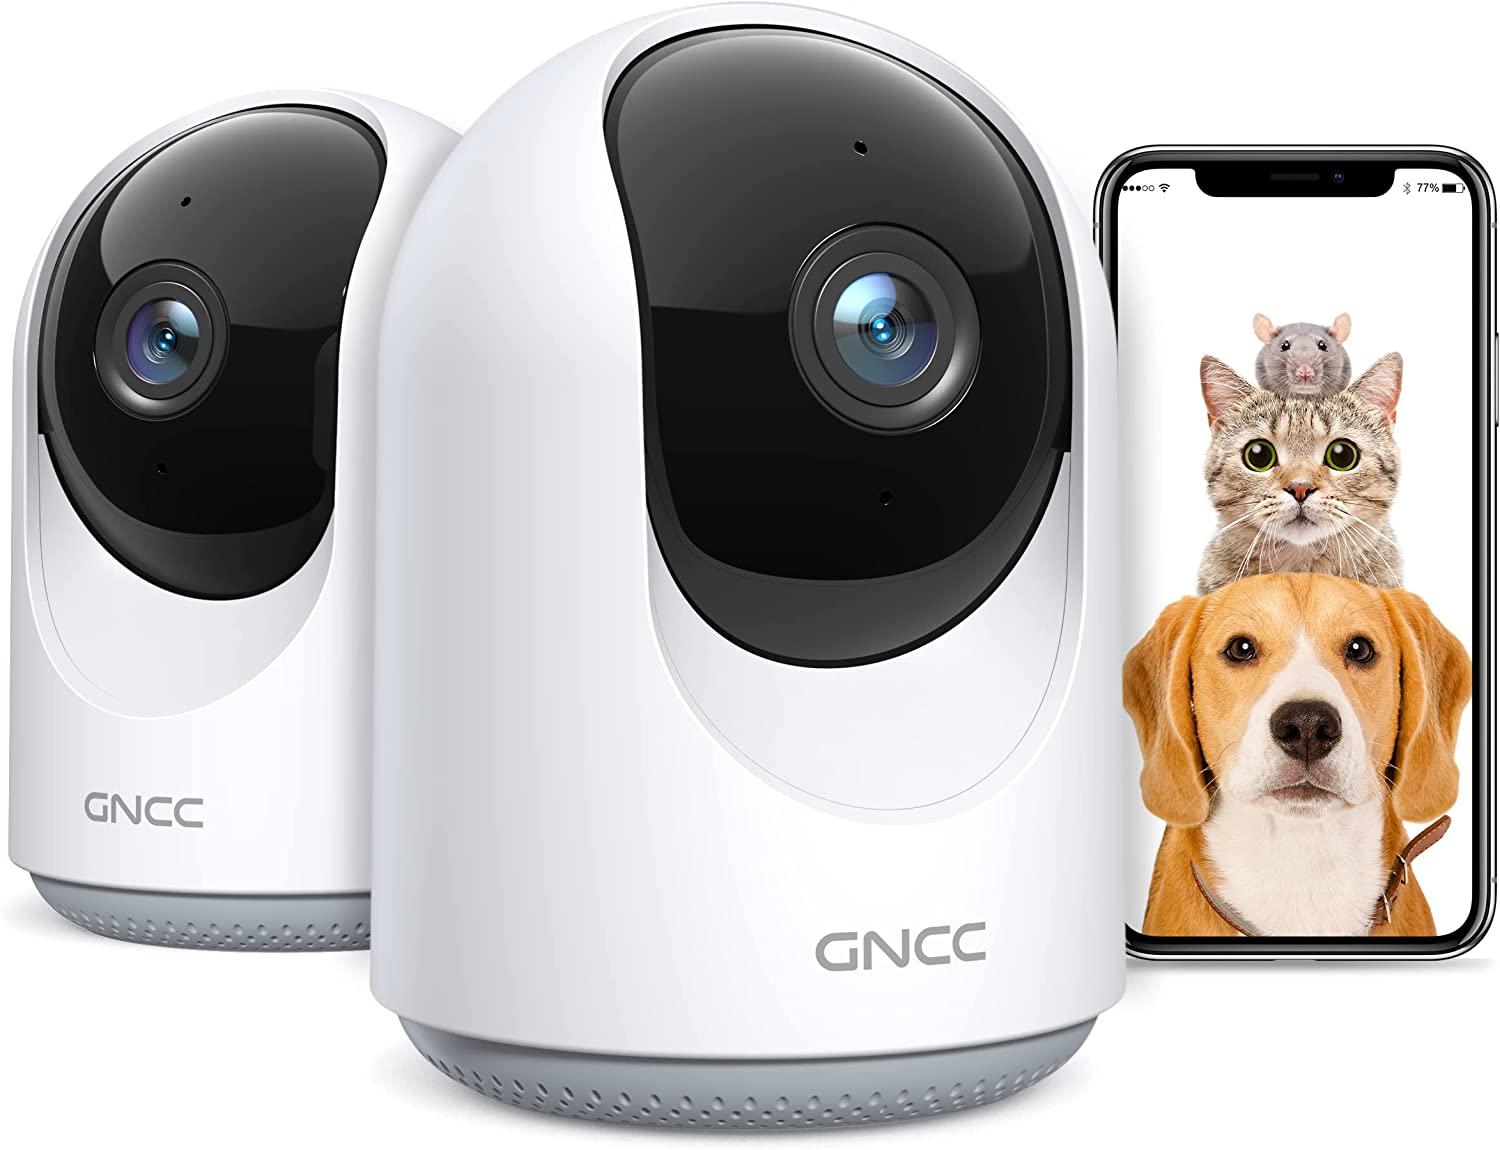 GNCC P1 1080P Indoor Security Camera with Night Vision for Baby/Pet